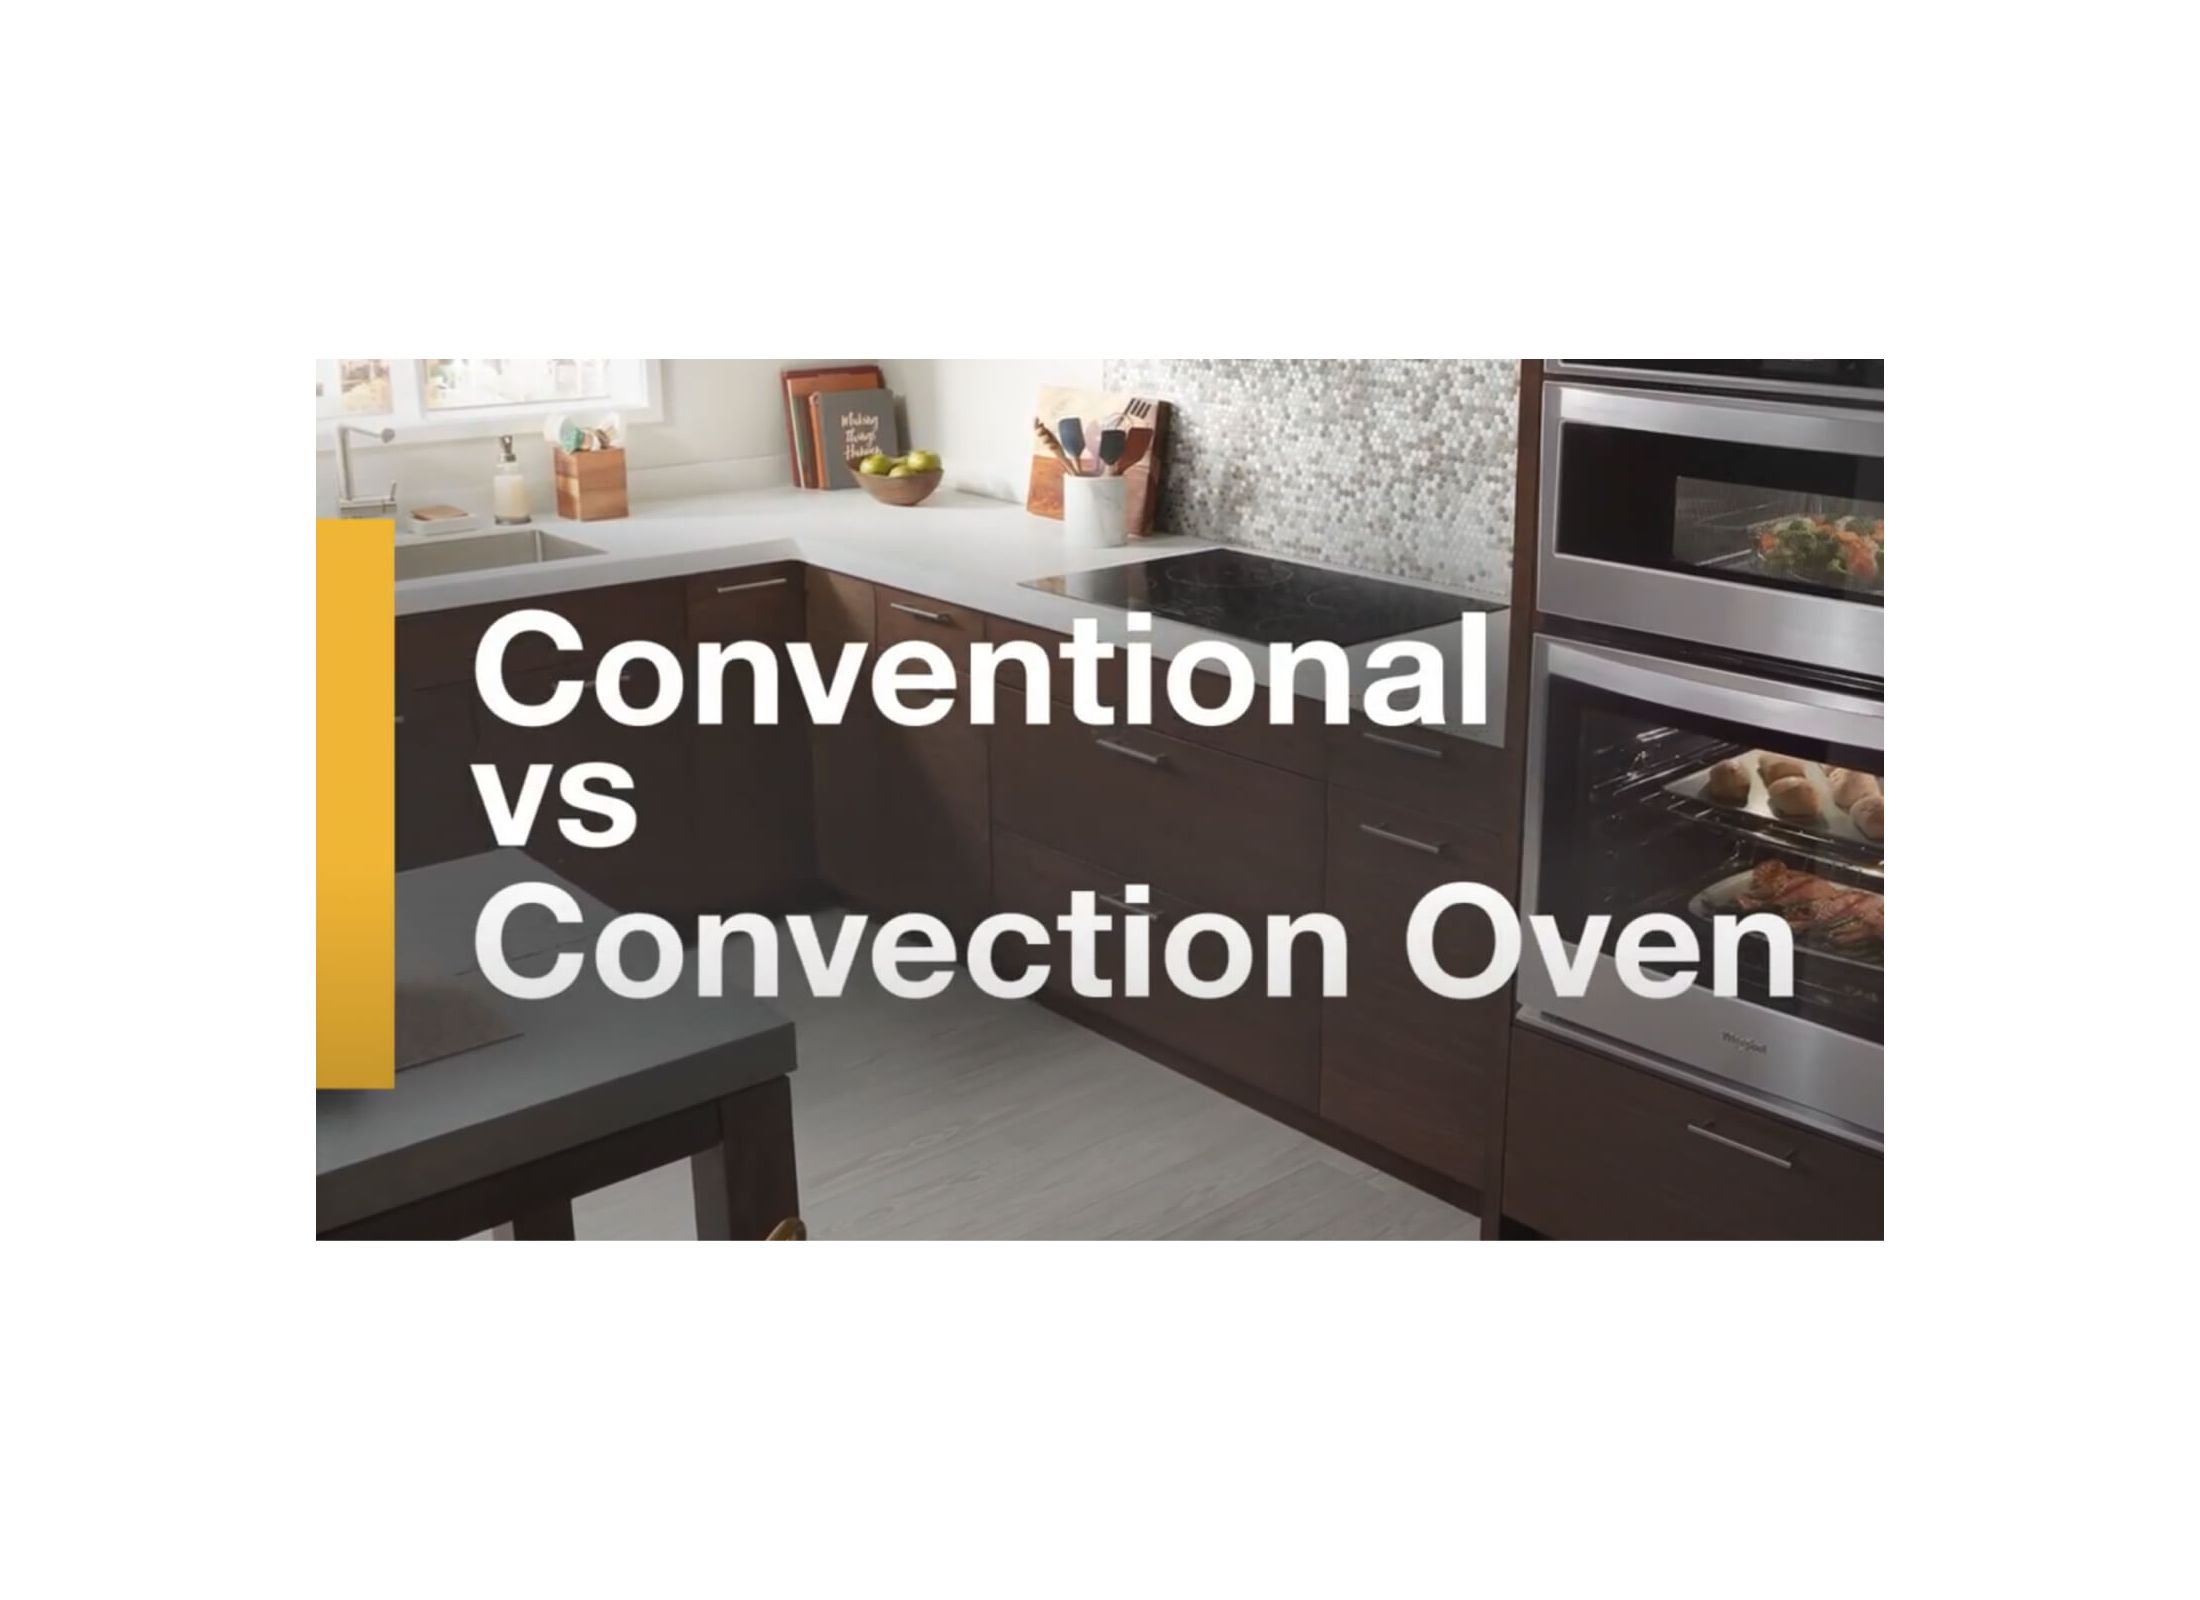 A video explaining the differences between conventional and convection ovens